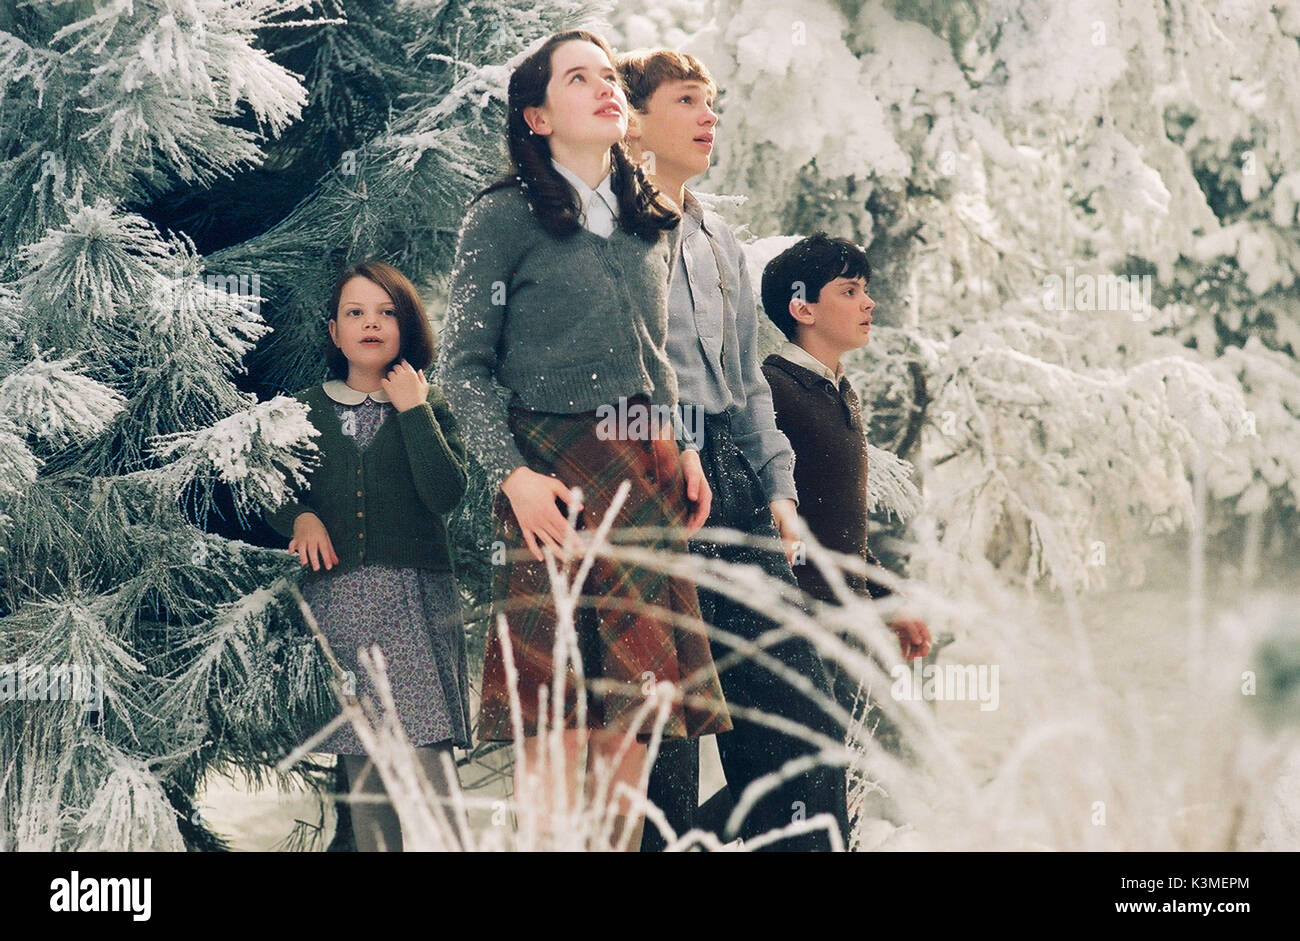 THE CHRONICLES OF NARNIA: THE LION, THE WITCH AND THE WARDROBE [US / BR 2005] (L-R) GEORGIE HENLEY, ANNA POPPLEWELL, WILLIAM MOSELEY, SKANDAR KEYNES     Date: 2005 Stock Photo